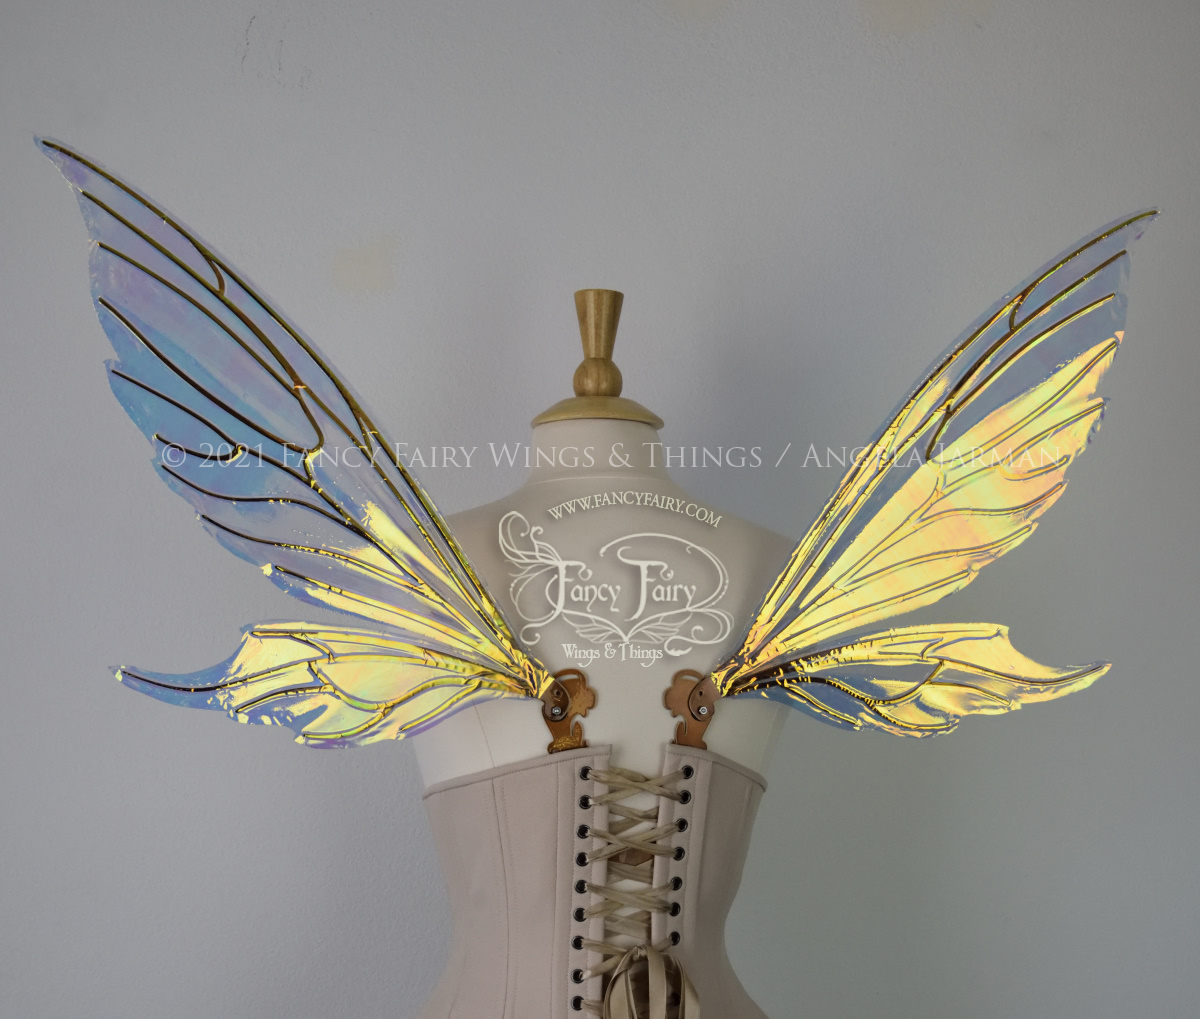 Econo Aynia Iridescent Convertible Fairy Wings in Clear Diamond Fire with Copper veins